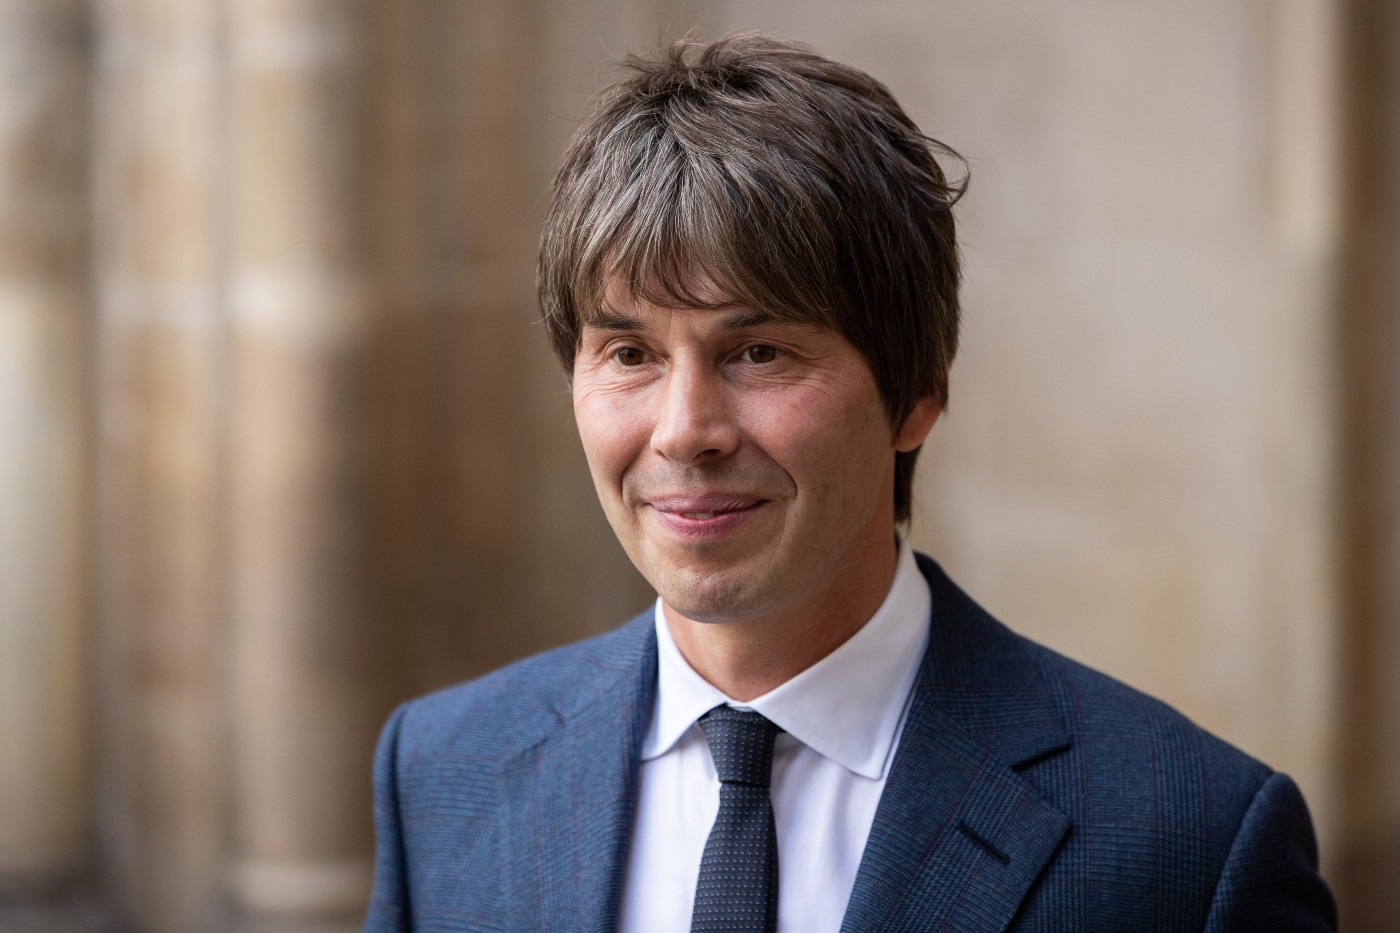 Brian Cox’s Mars mission documentary gets BBC’s nod of approval